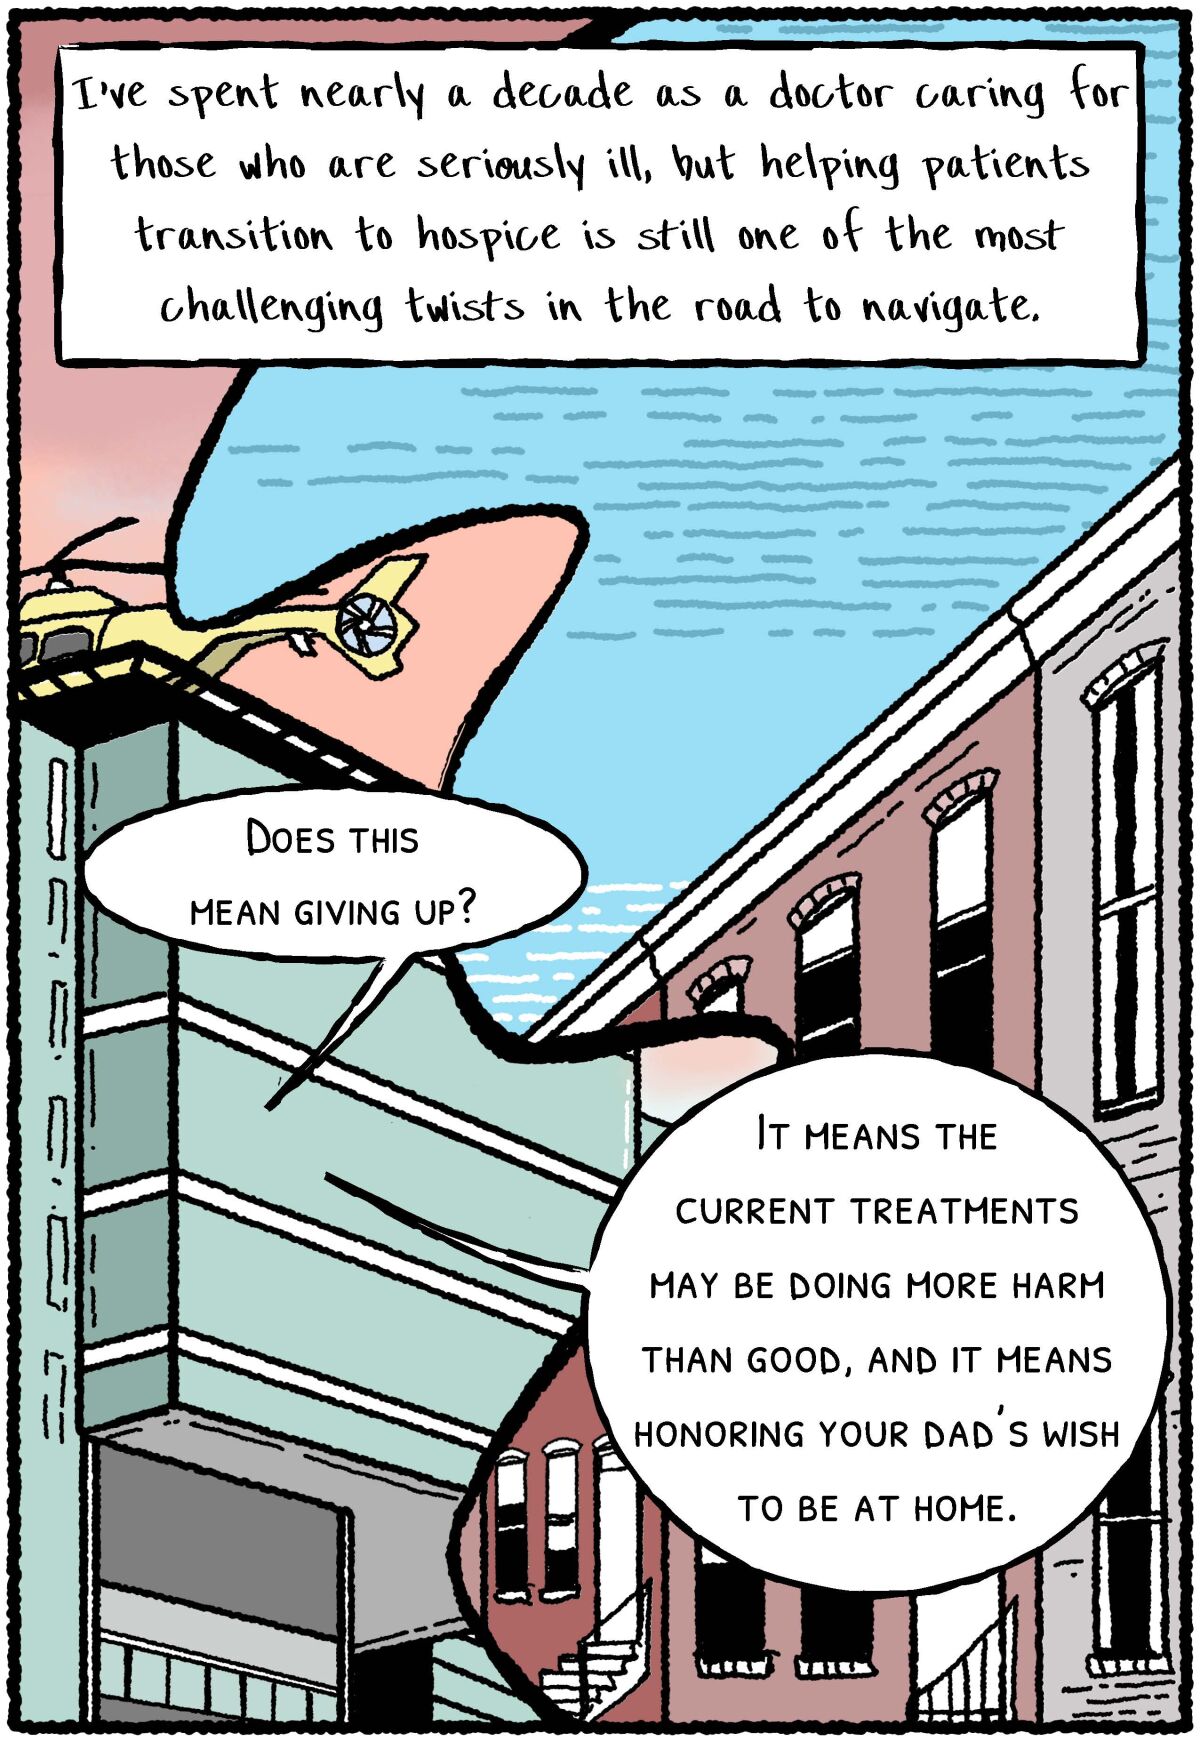 split panel of a hospital exterior and a row house with a conversation explaining the transition to hospice